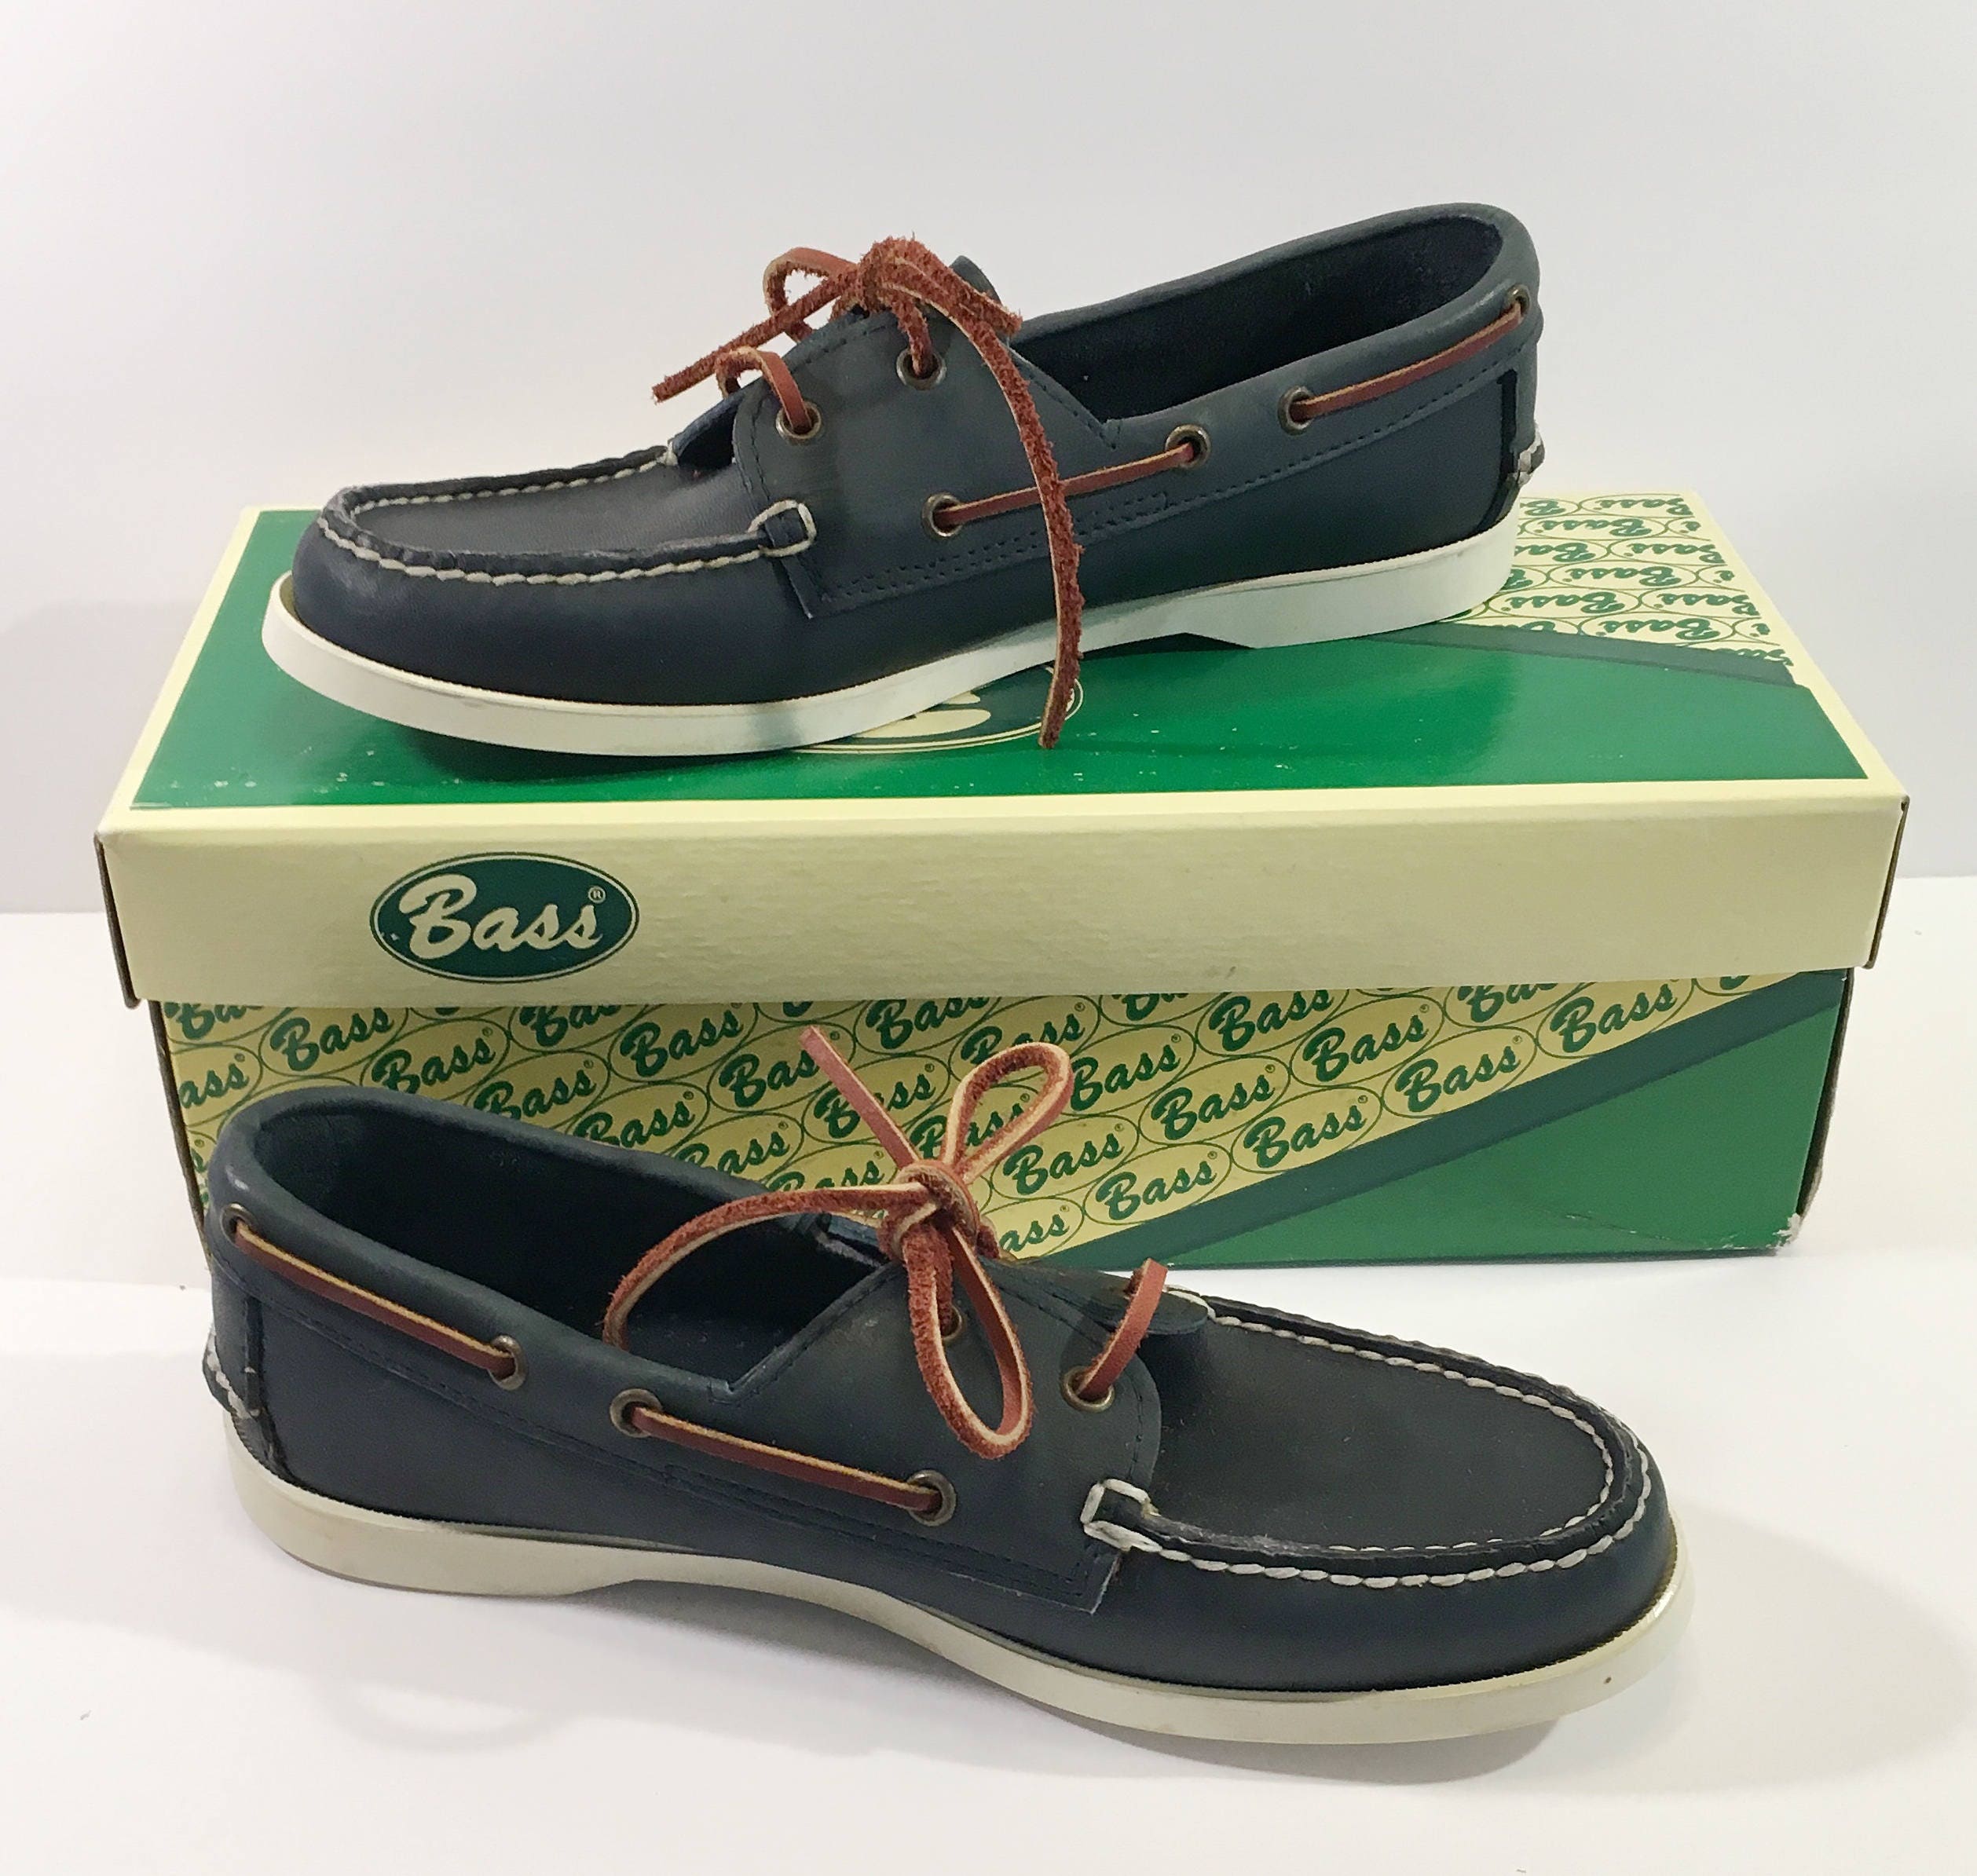 Bass Boat Shoes Vintage 80s New Old Stock NIB in Box Original - Etsy